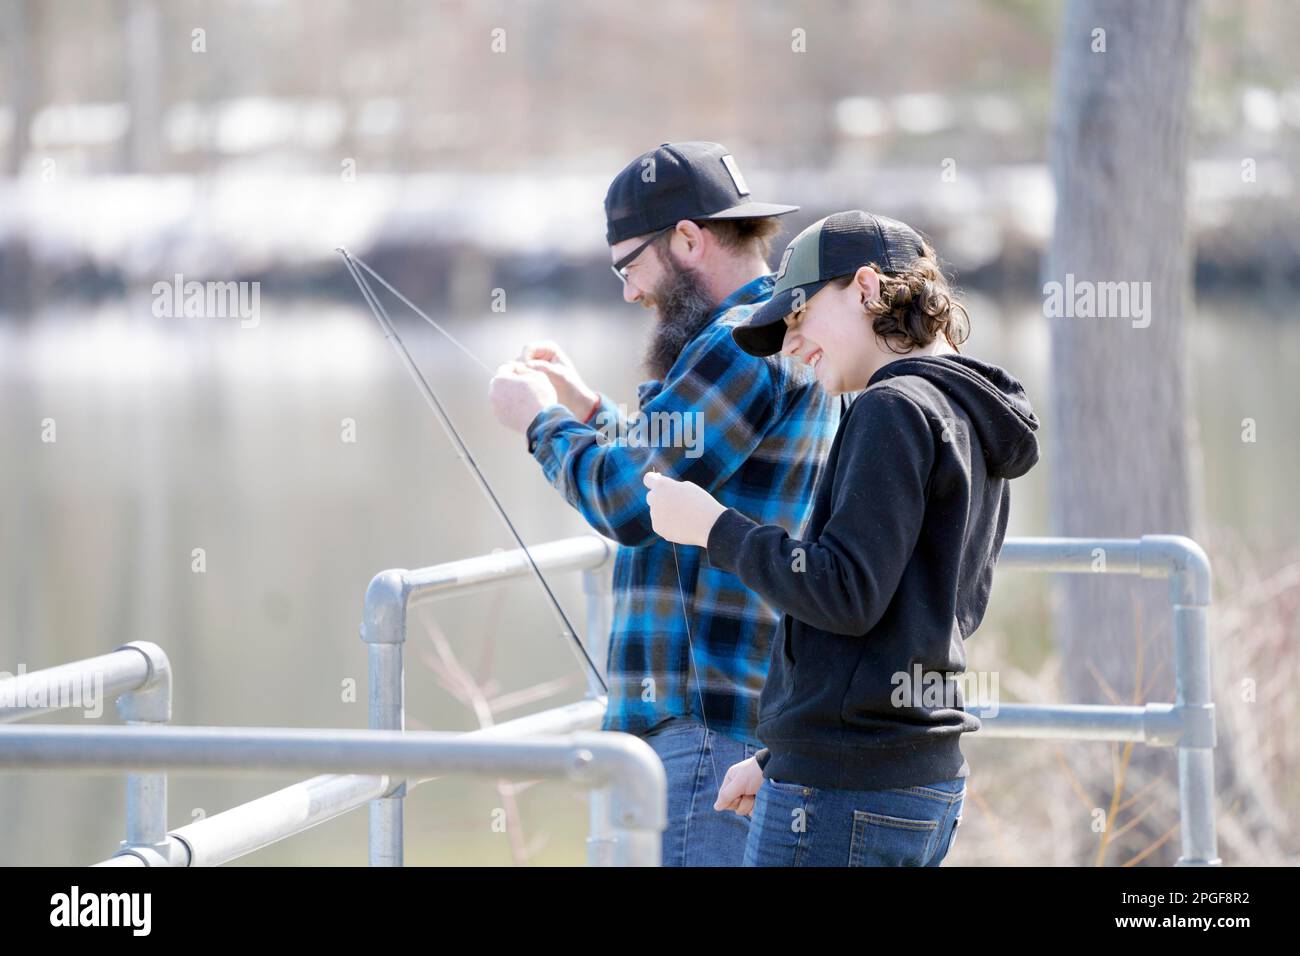 https://c8.alamy.com/comp/2PGF8R2/oliver-hunt-and-his-son-oliver-bait-hooks-at-the-cheshire-reservoir-for-a-day-of-fishing-in-the-sunshine-in-cheshire-mass-wednesday-march-22-2023-they-didnt-have-a-lot-of-luck-but-they-were-able-to-try-various-baits-and-lures-to-knock-the-rust-off-ben-garverthe-berkshire-eagle-via-ap-2PGF8R2.jpg